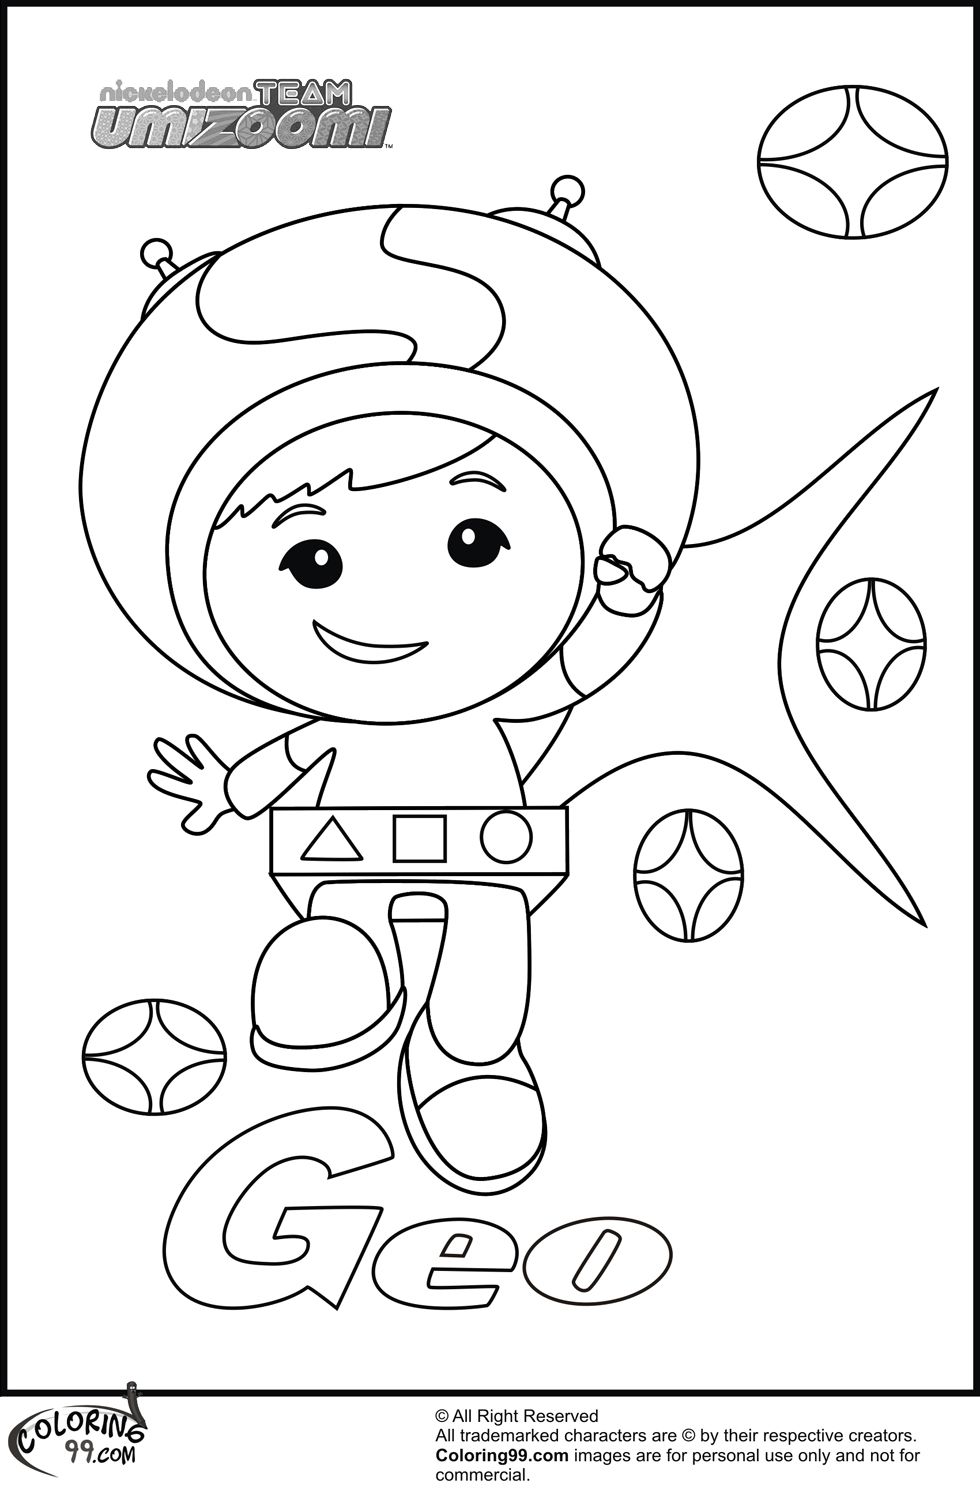 Team Umizoomi Coloring Pages, umizoomi geo colouring pages ...